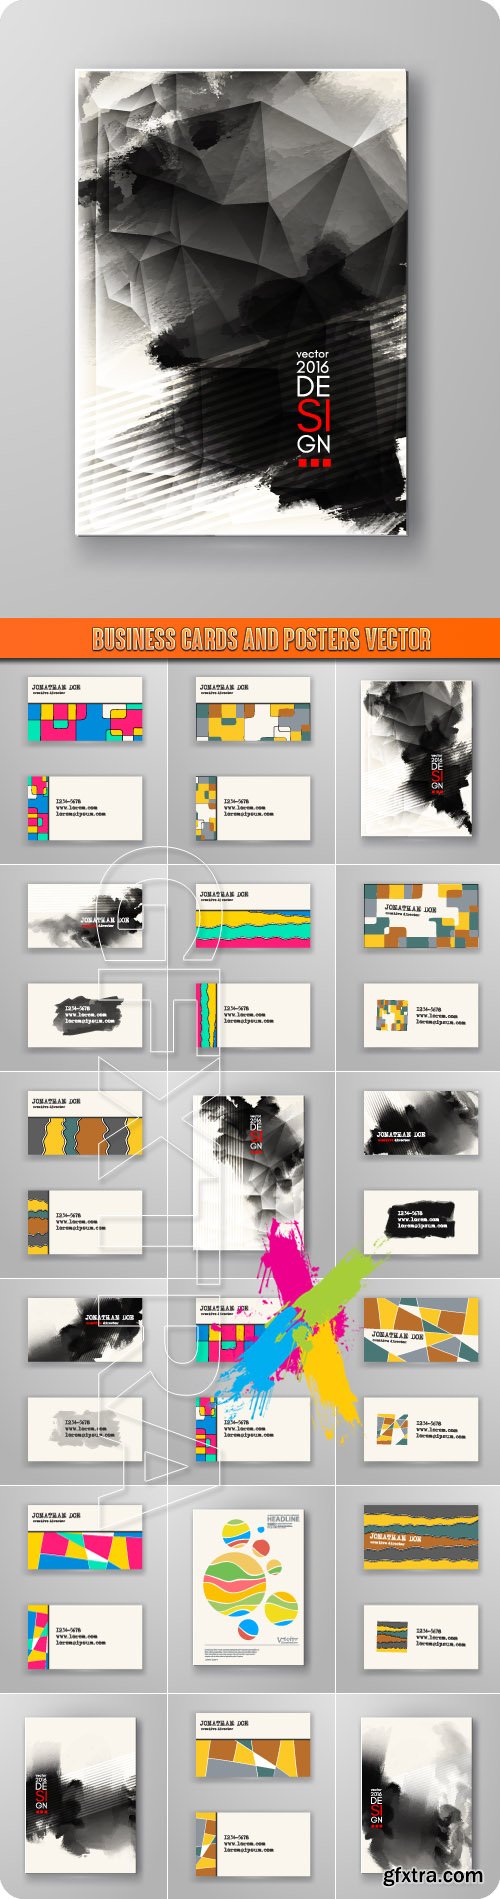 Business cards and posters vector